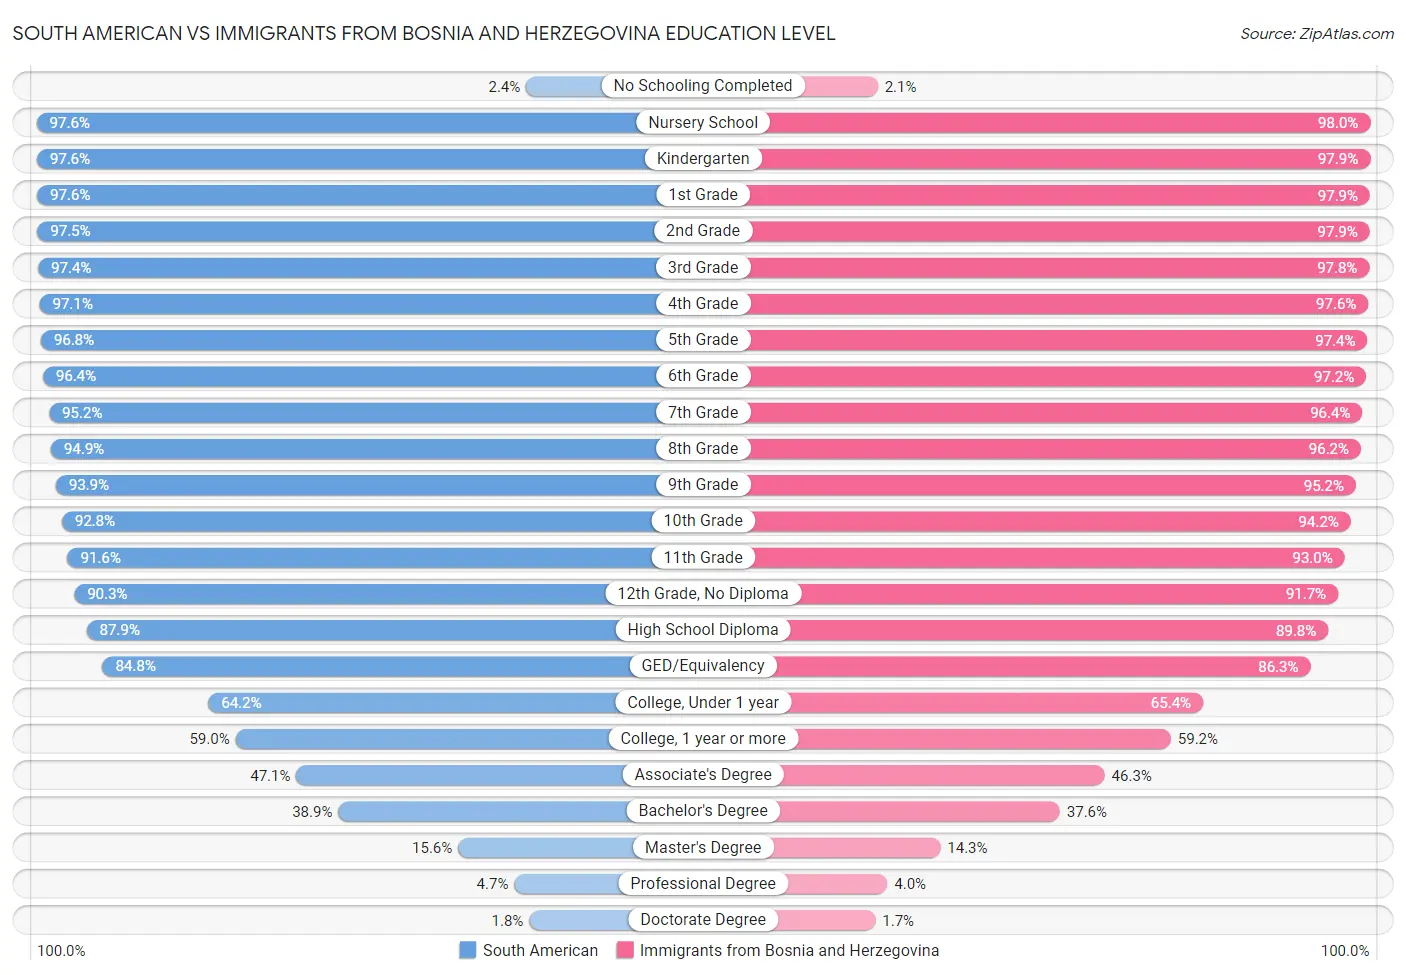 South American vs Immigrants from Bosnia and Herzegovina Education Level